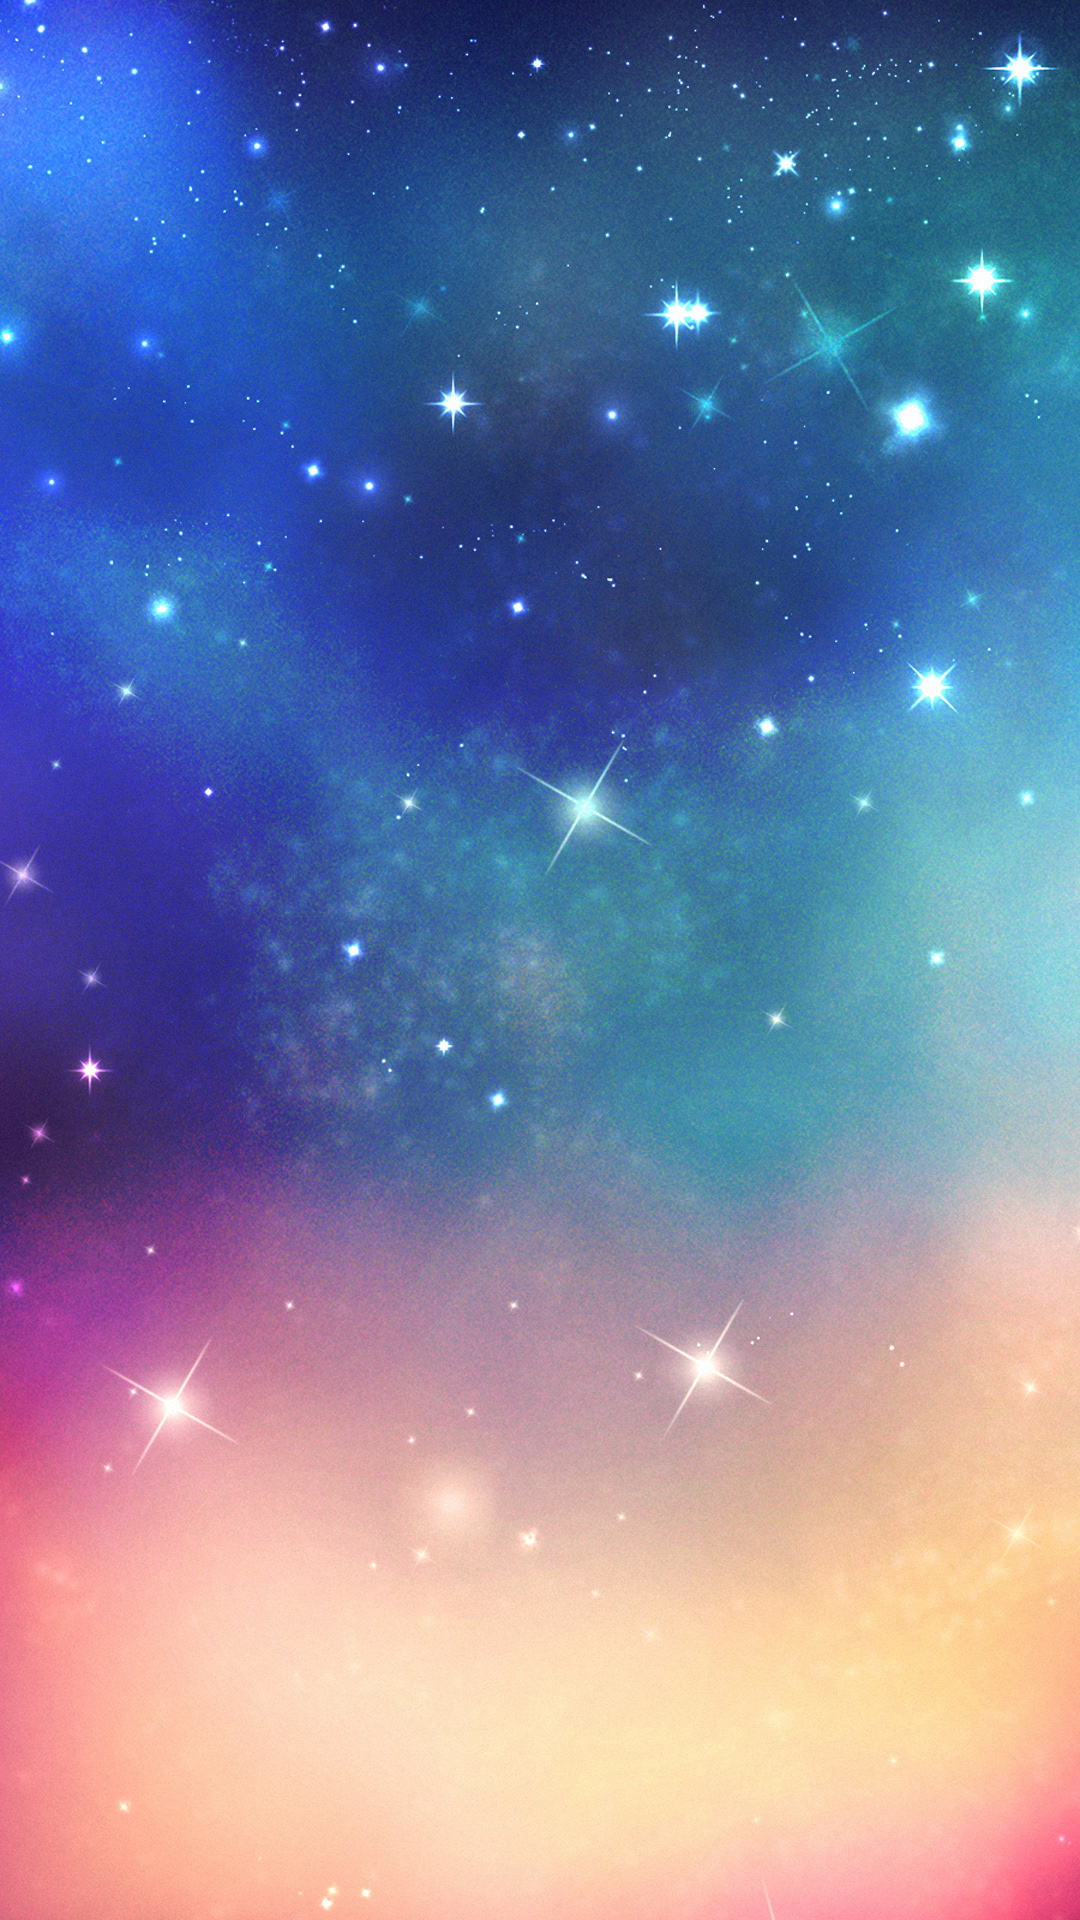 Shiny Fantasy Ouer Space iPhone 8 Wallpaper Free Download